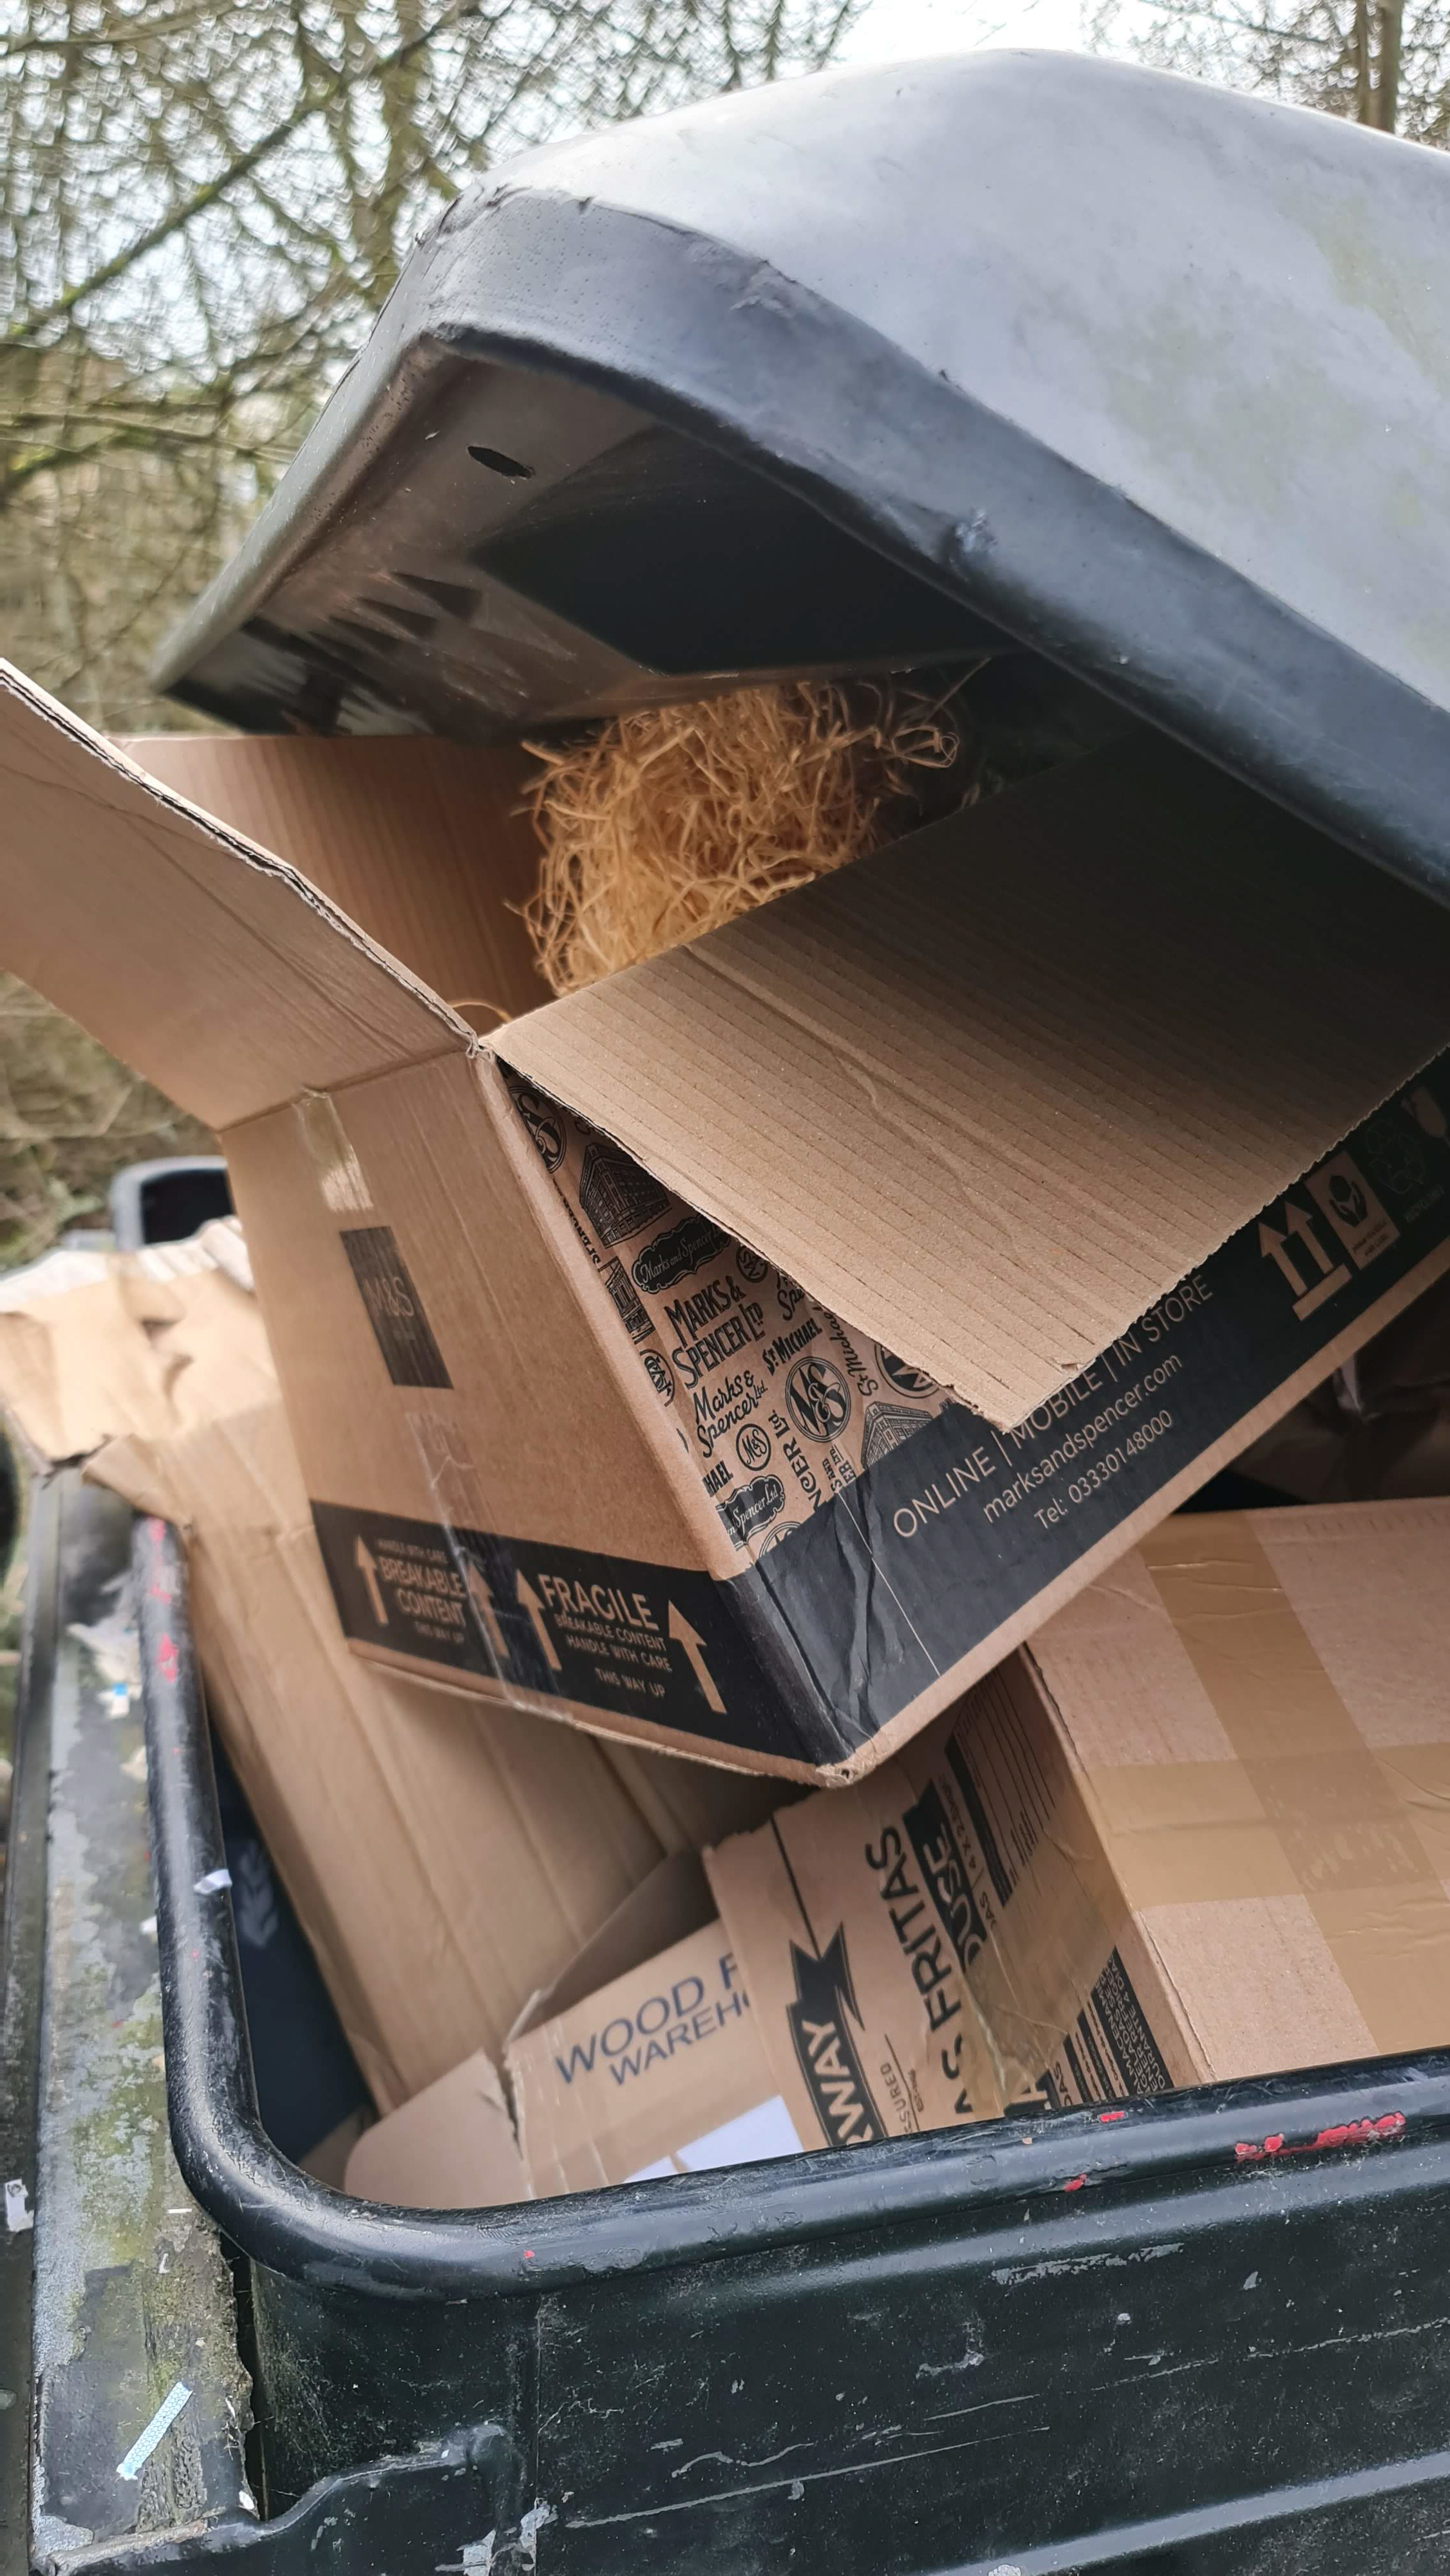 ISSUE: Fly-tipping at Broughton recycling centre